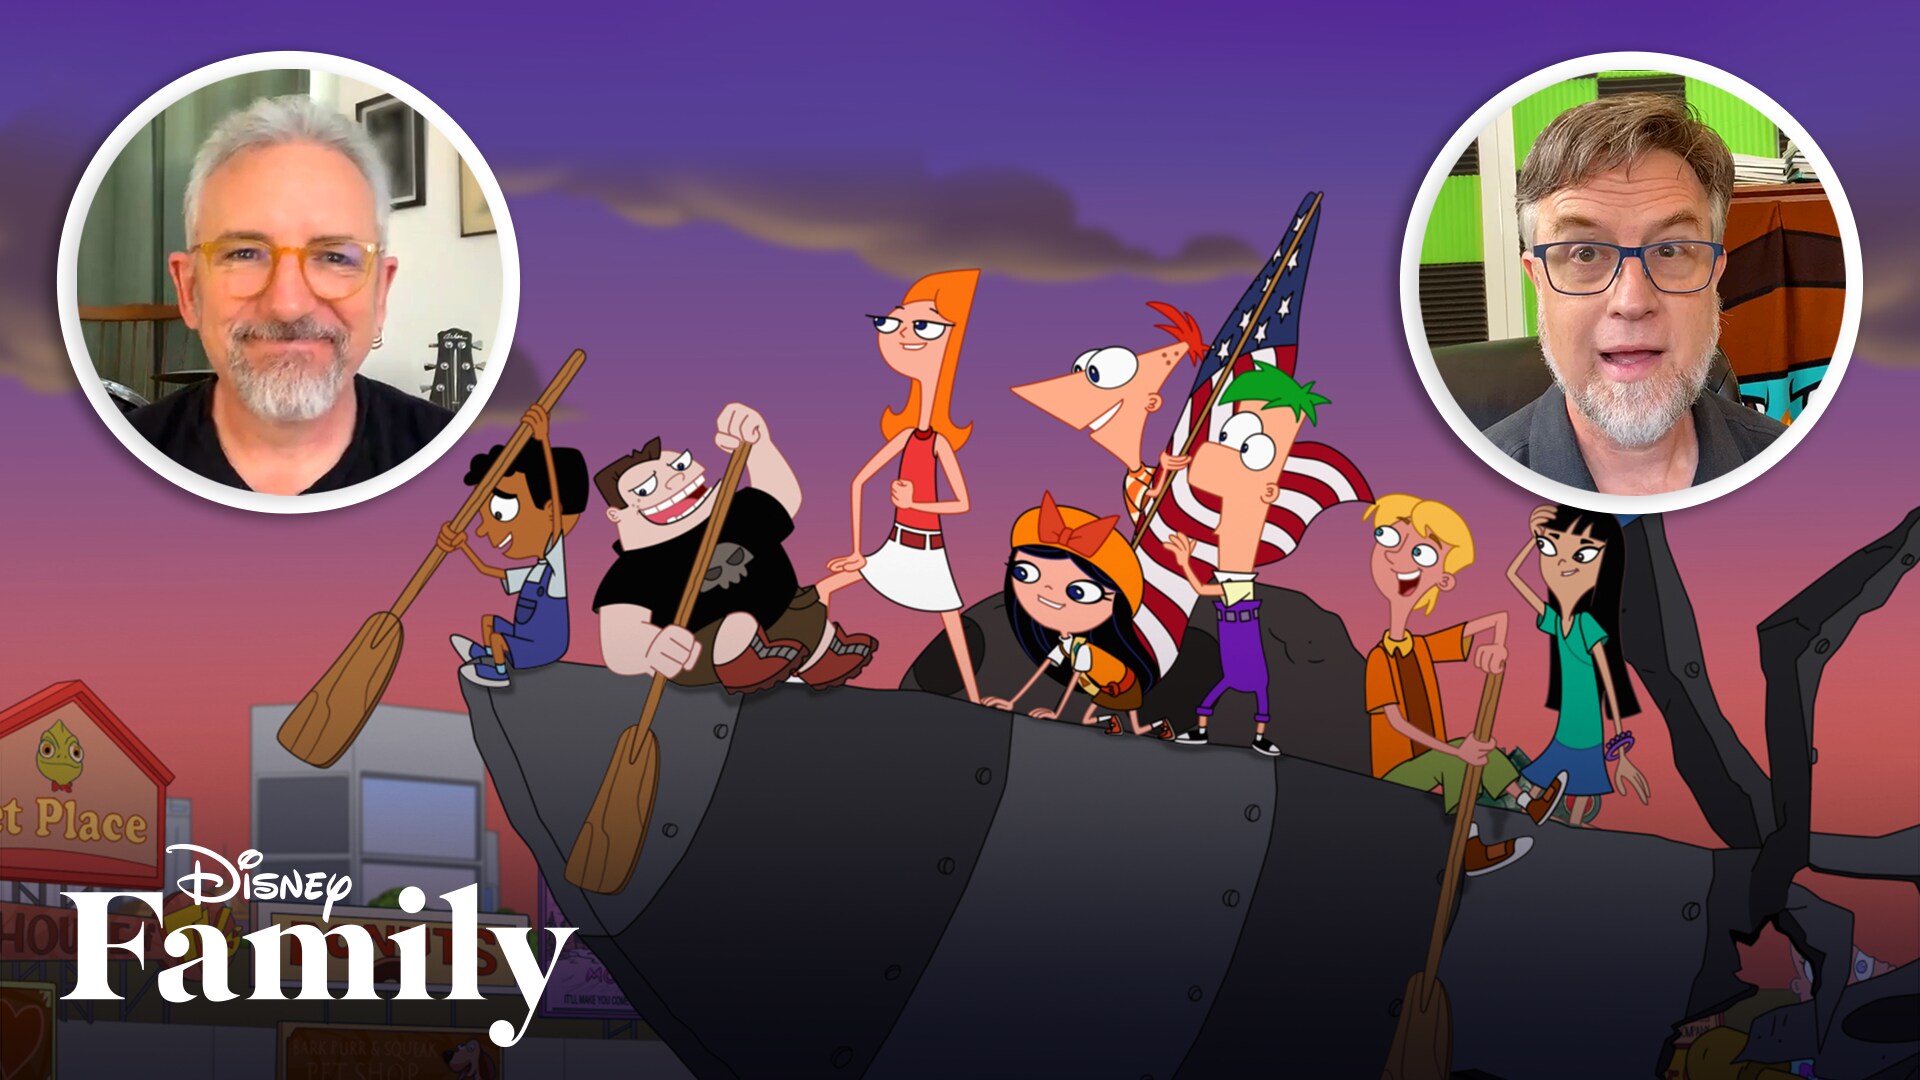 The Cast & Creators of Phineas and Ferb Explain the Phineas and Ferb Family Tree in 60 Seconds | Disney Family